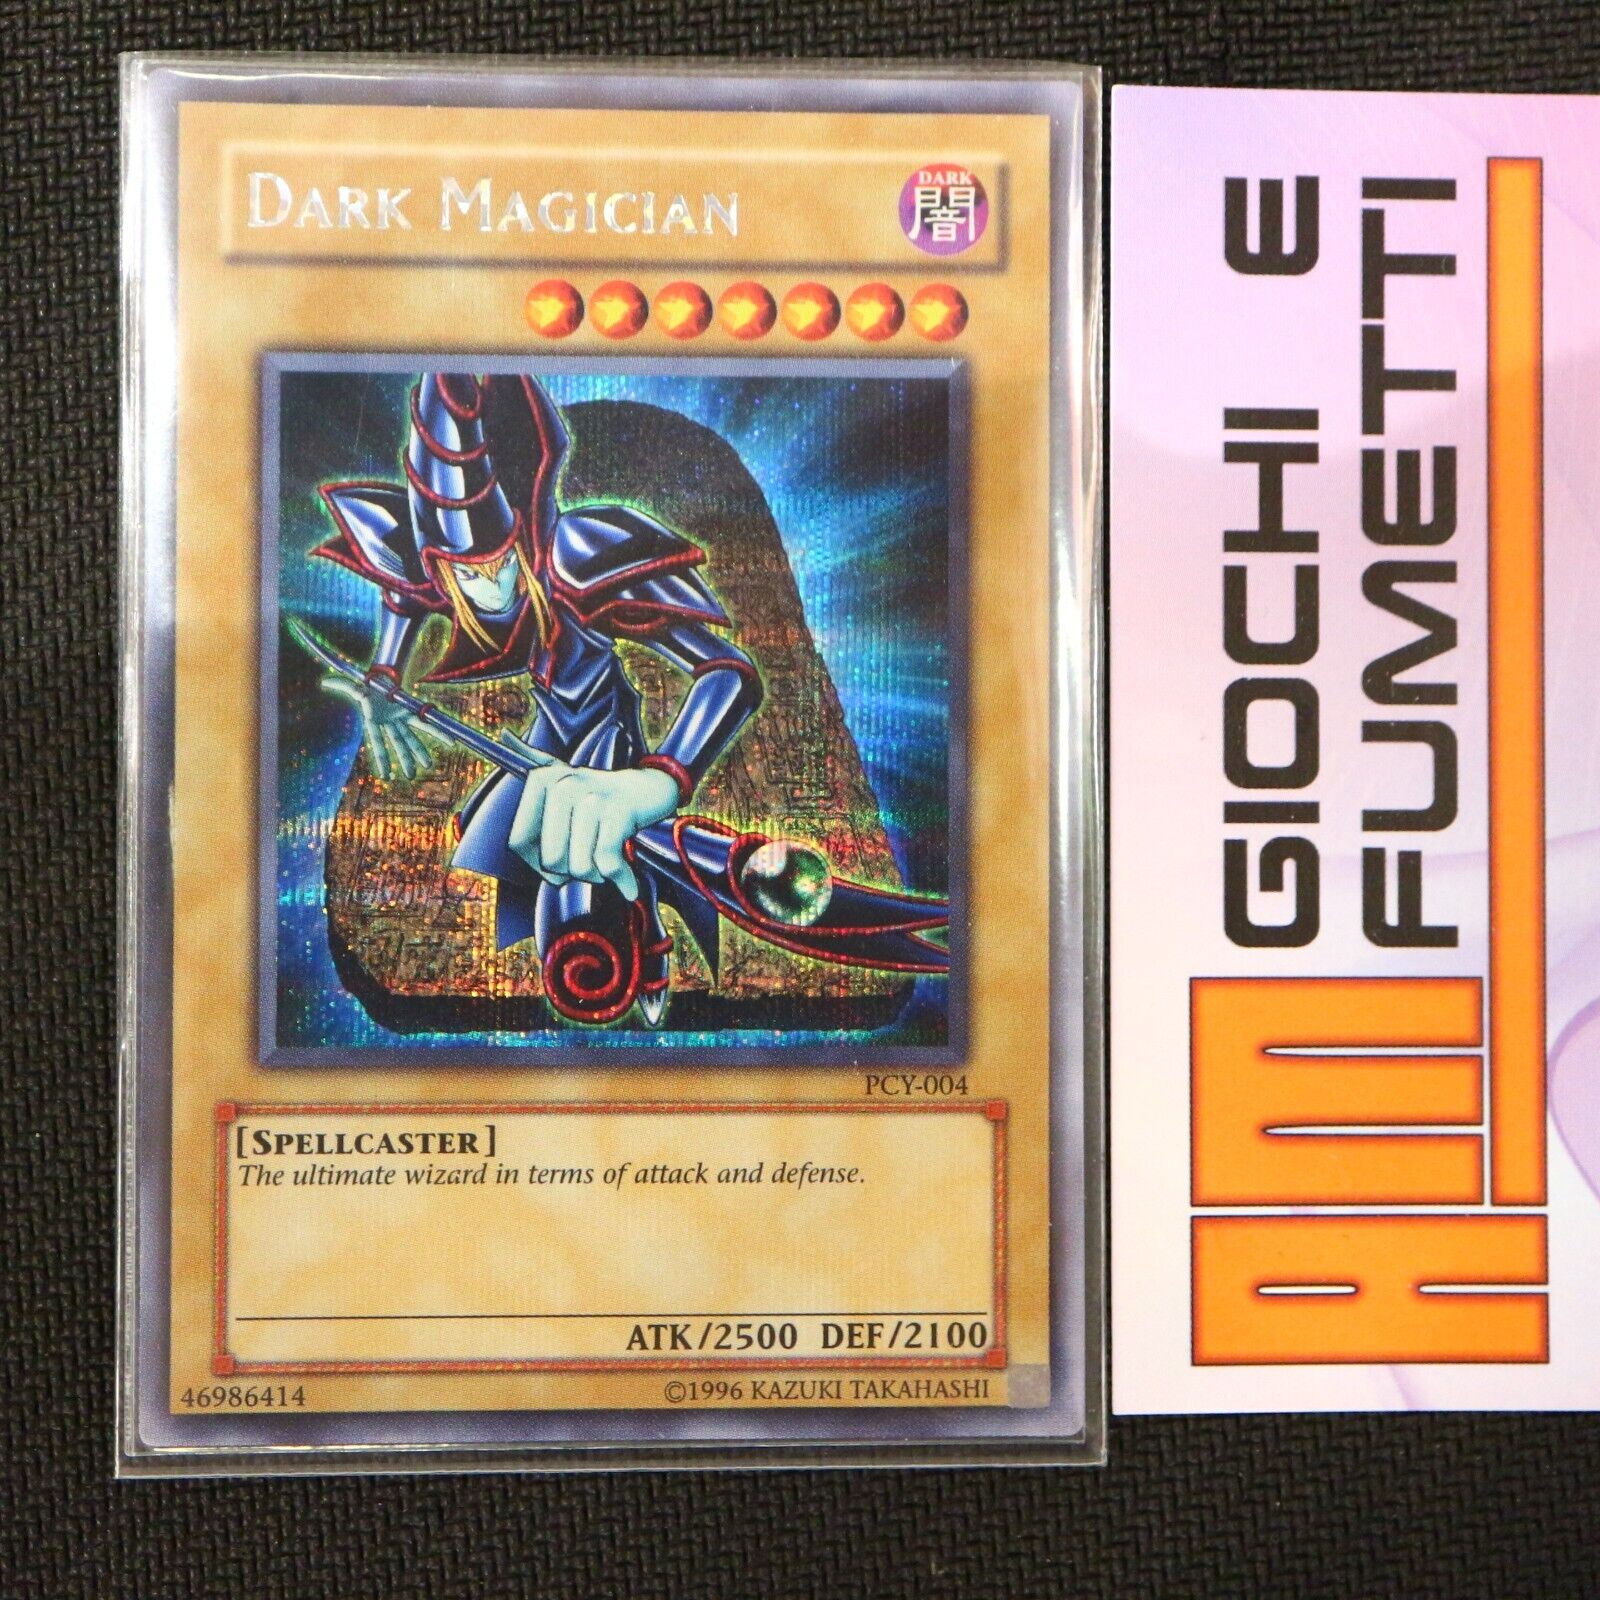 DARK MAGICIAN in English YUGIOH rare PARALLEL yu-gi-oh A REAL DEAL